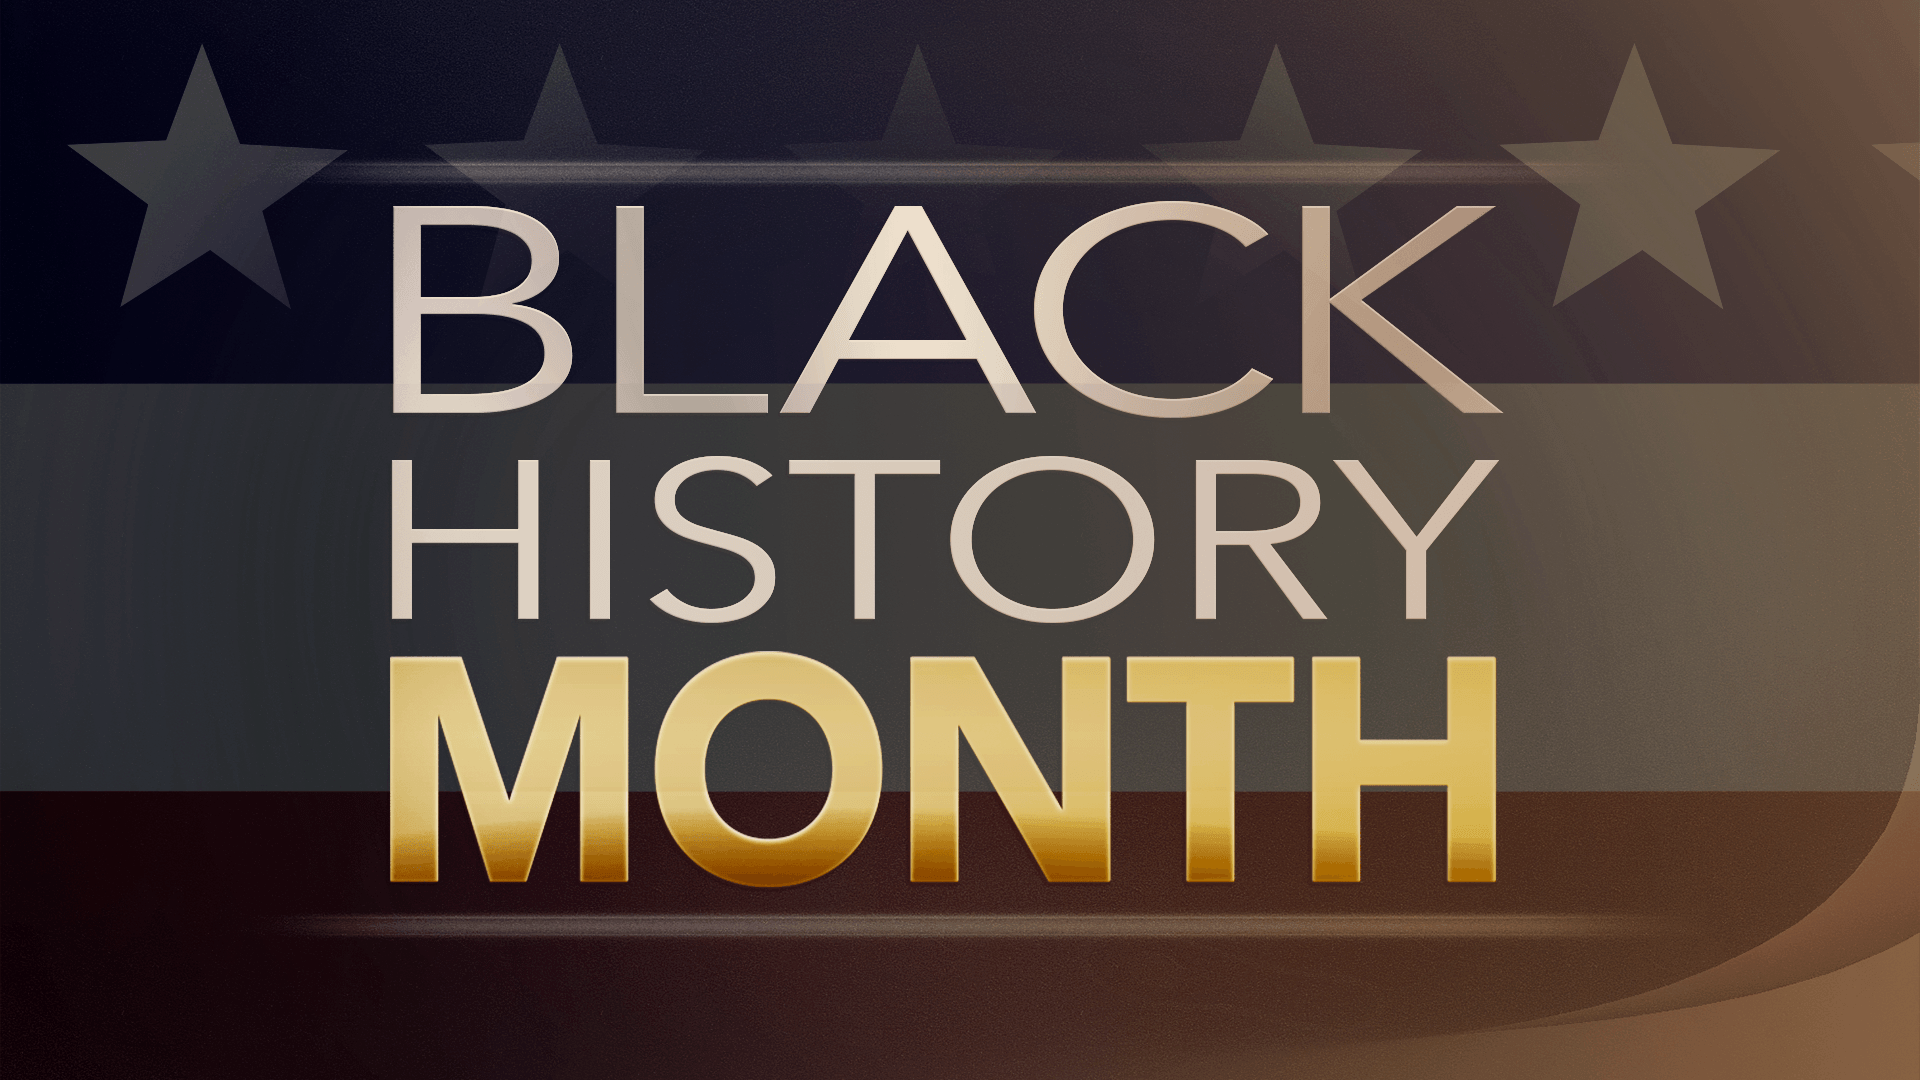 Black History Month's origins and impact